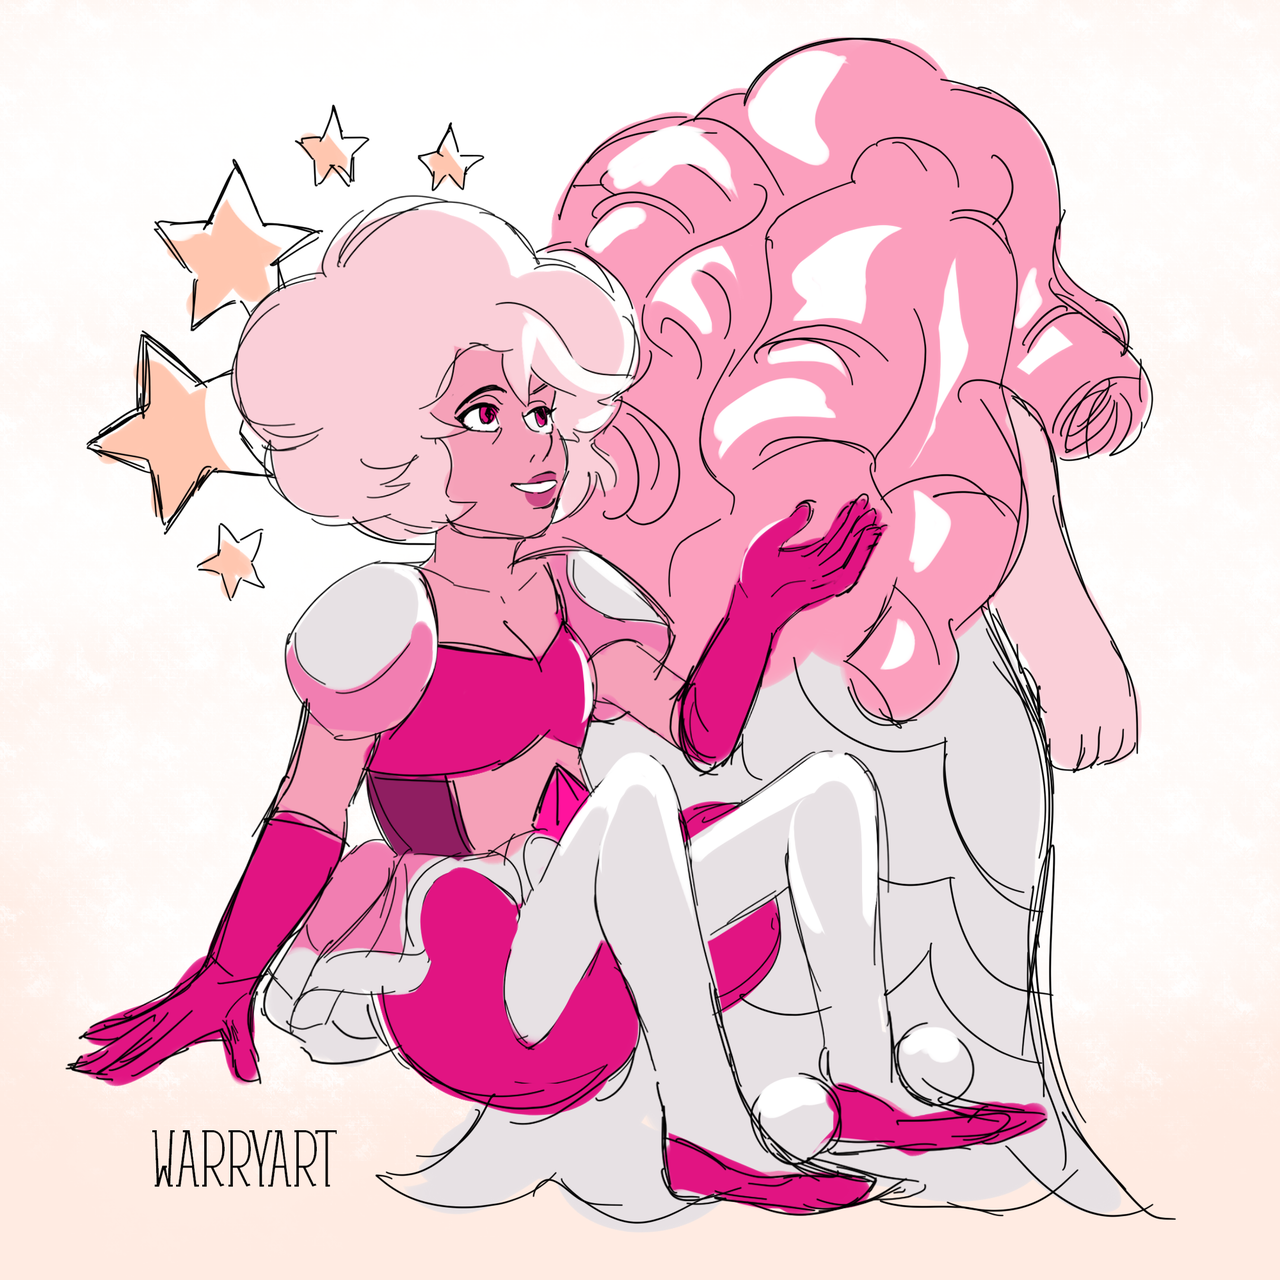 HEAR ME OUT. I have a feeling that the reason why Pink was so obsessed with the idea of gems and humans serving no purpose whatsoever was because she always carried a looming, haunting feeling of...